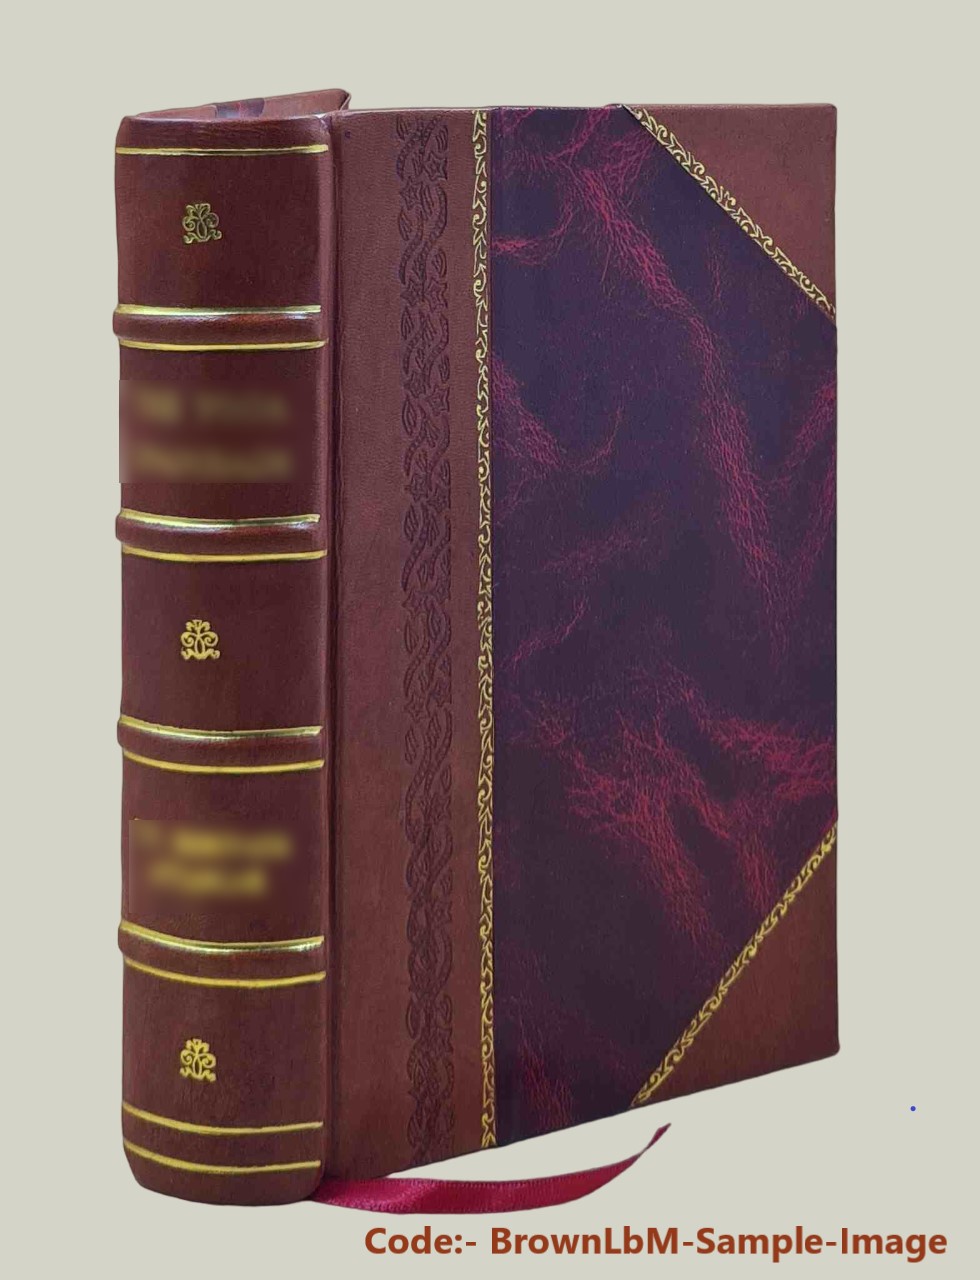 The treatment of Armenians in the Ottoman Empire 1915-16. Documents presented to Viscount Grey of Fallodon, secretary of state for foreign affiars, by Viscount Bryce. With a preface by Viscount Bryce. 1916 [Leather Bound] - Great Britain. Foreign Office.